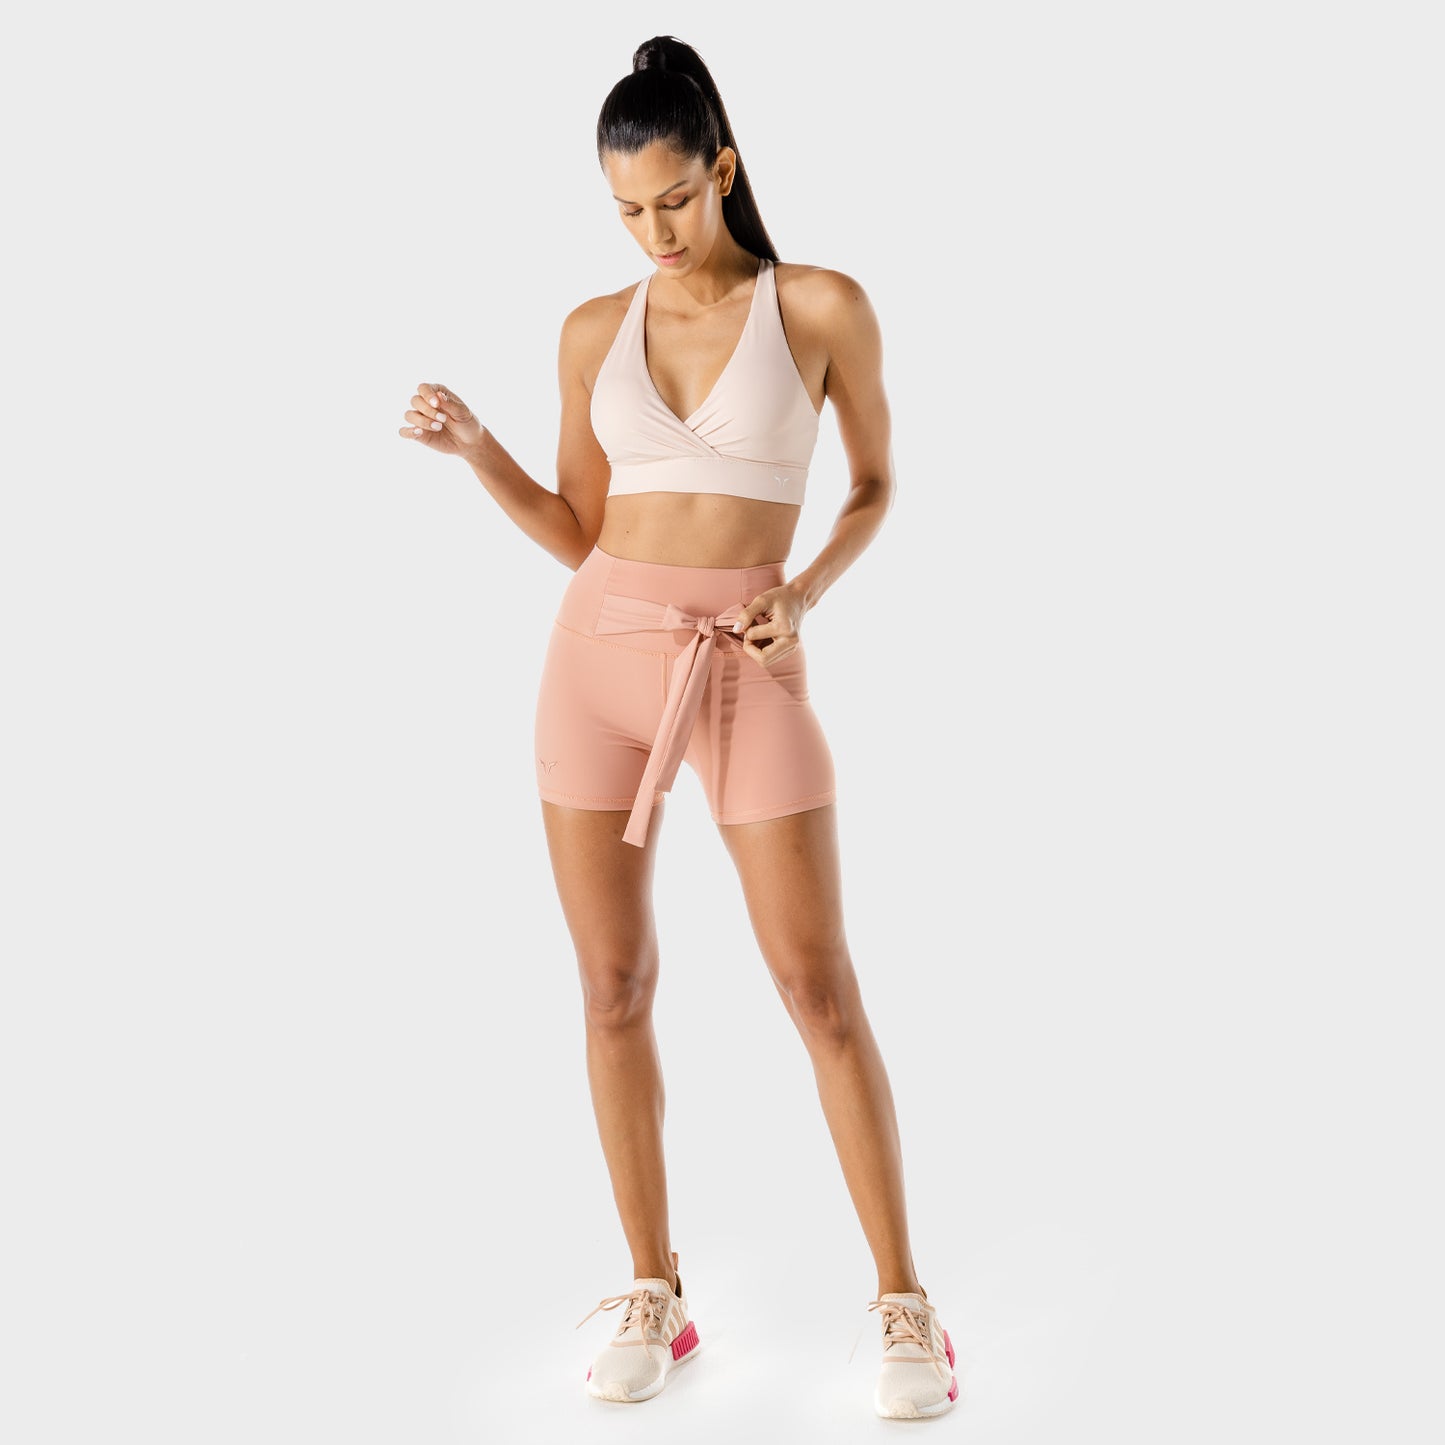 squatwolf-workout-clothes-womens-fitness-tie-shorts-pink-gym-shorts